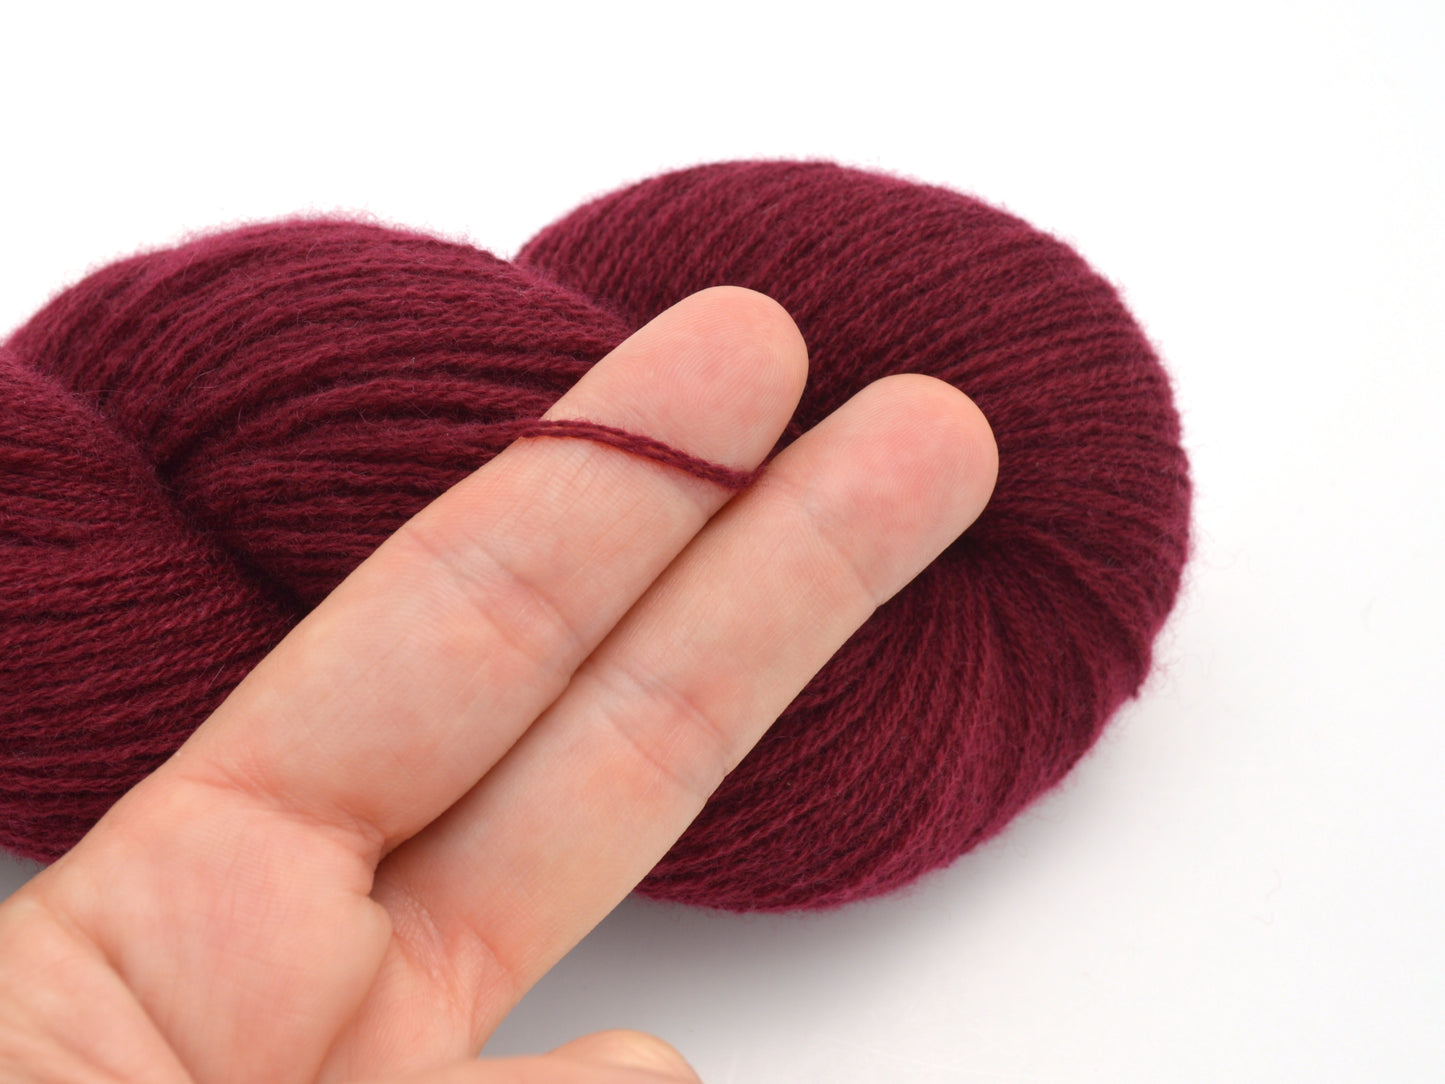 Heavy Lace Weight Recycled Cashmere Yarn in Burgundy